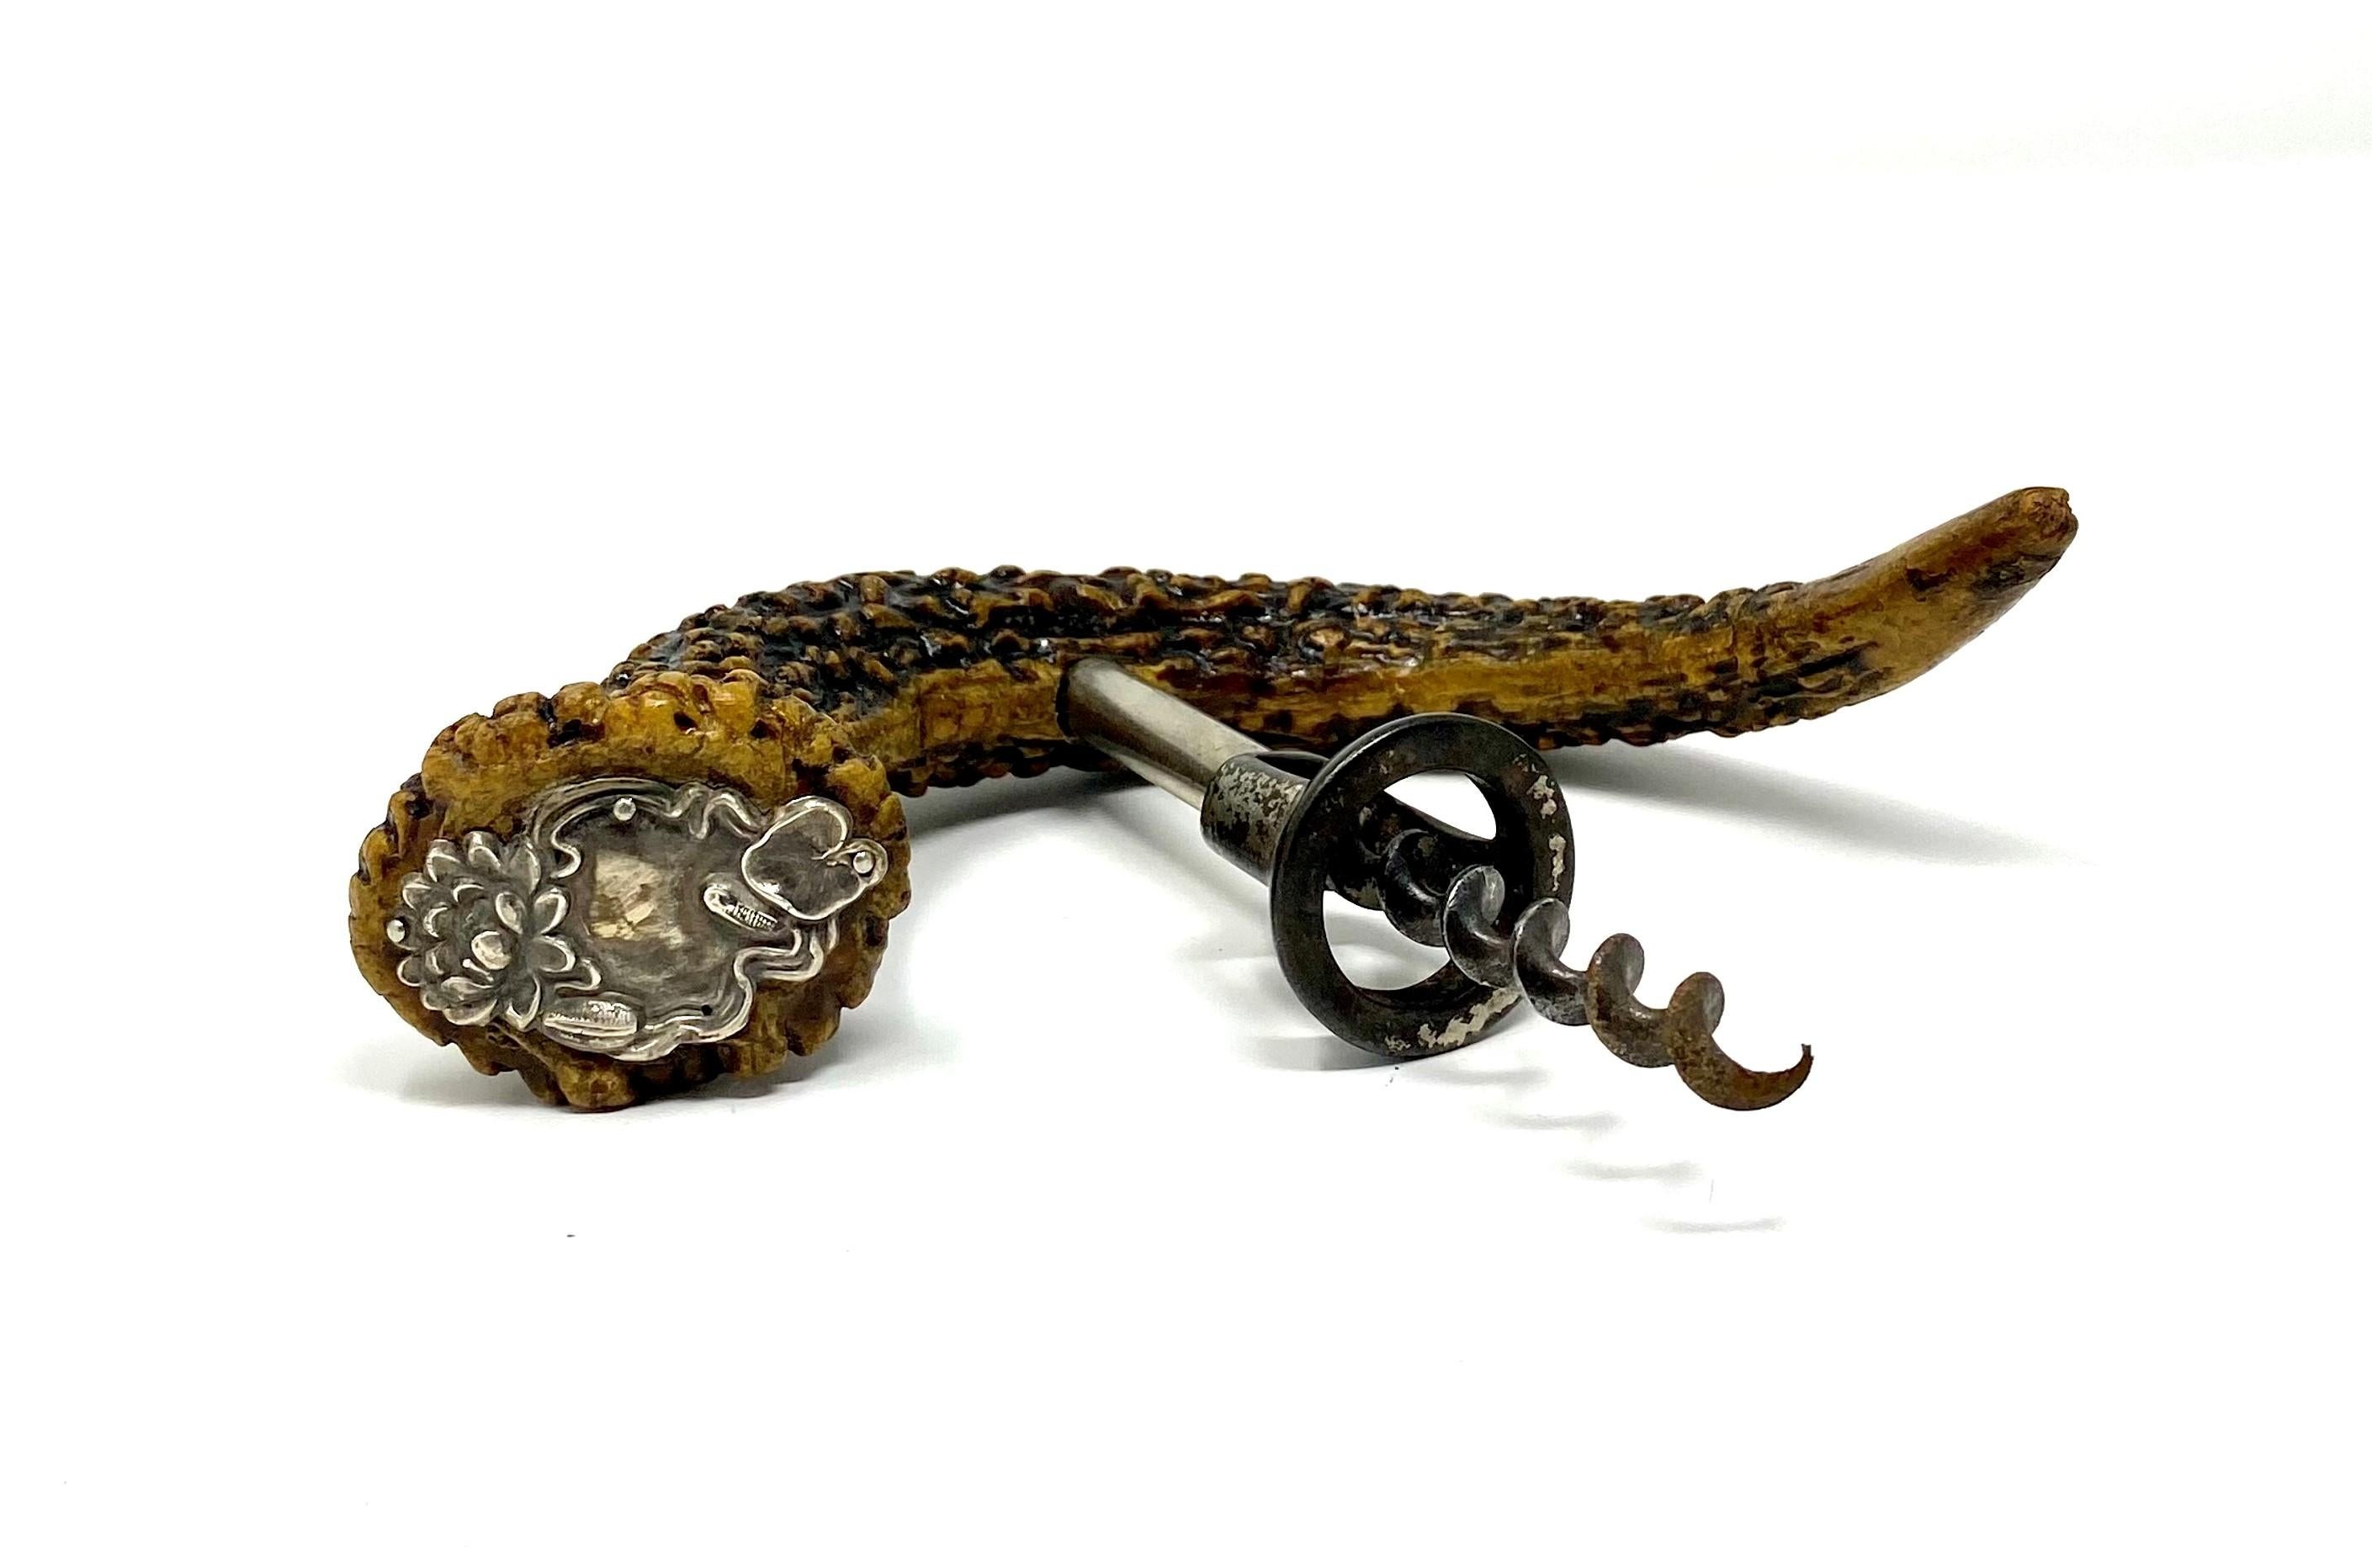 Antique American antler corkscrew with sterling silver mount, circa 1900.